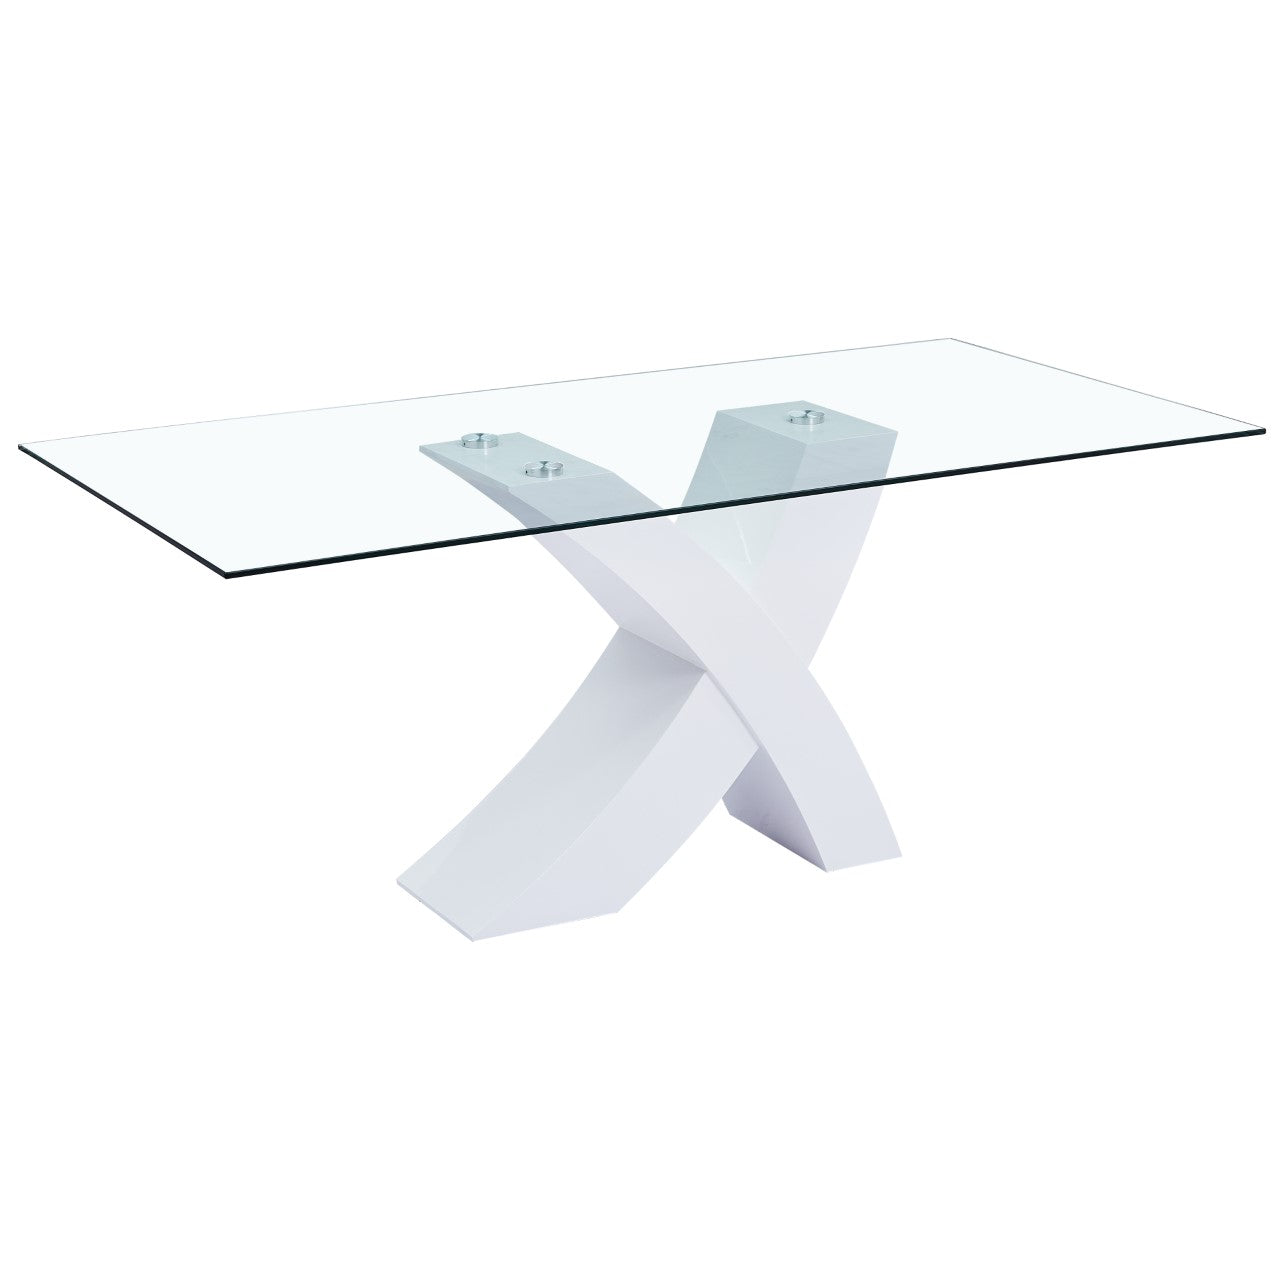 DT-KL04 PERVIS Dining Table